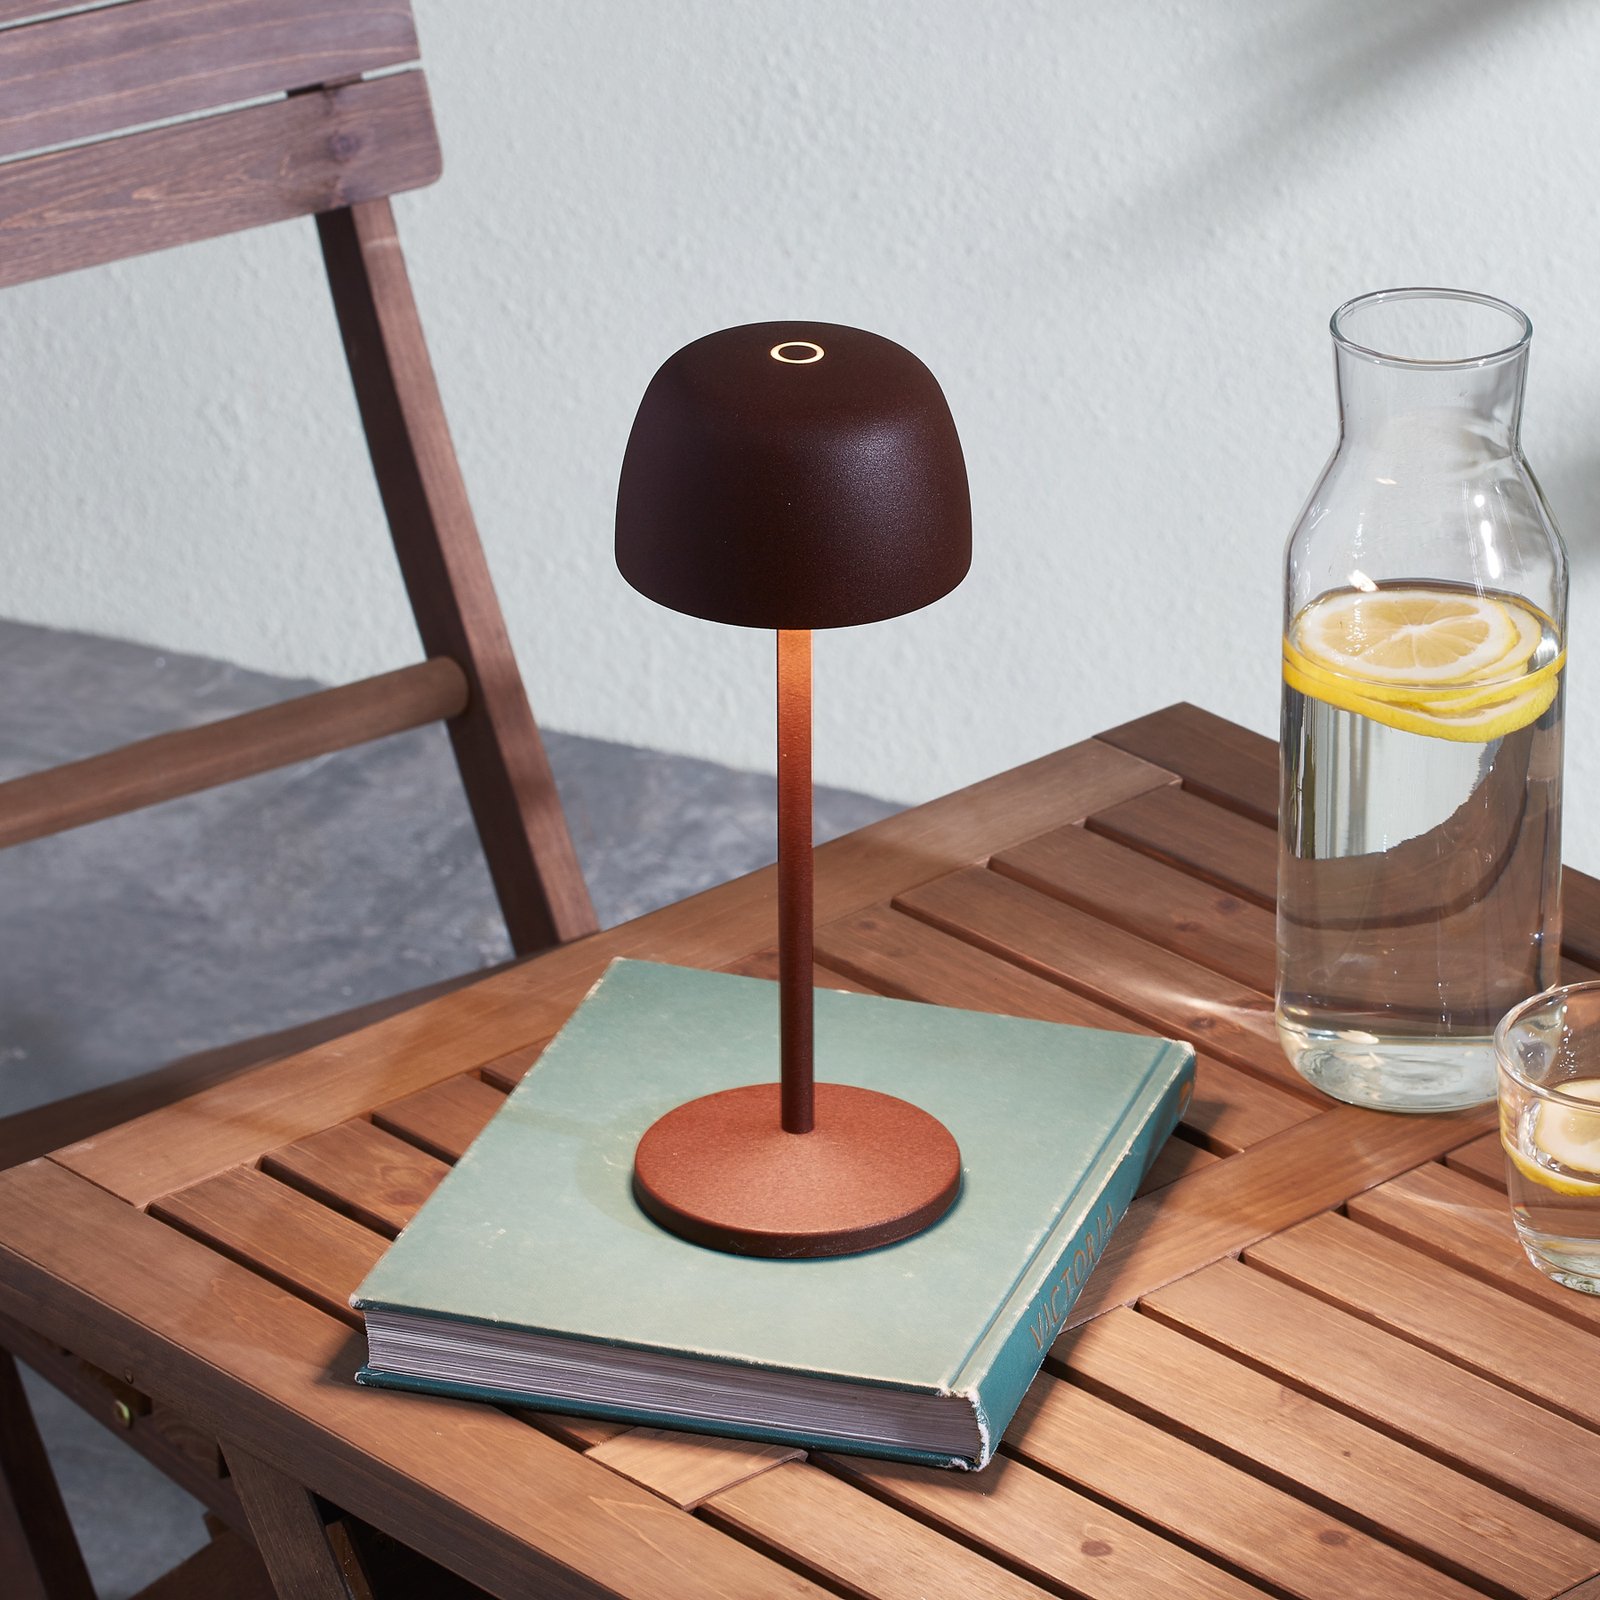 Lindby LED table lamp Arietty, rust brown